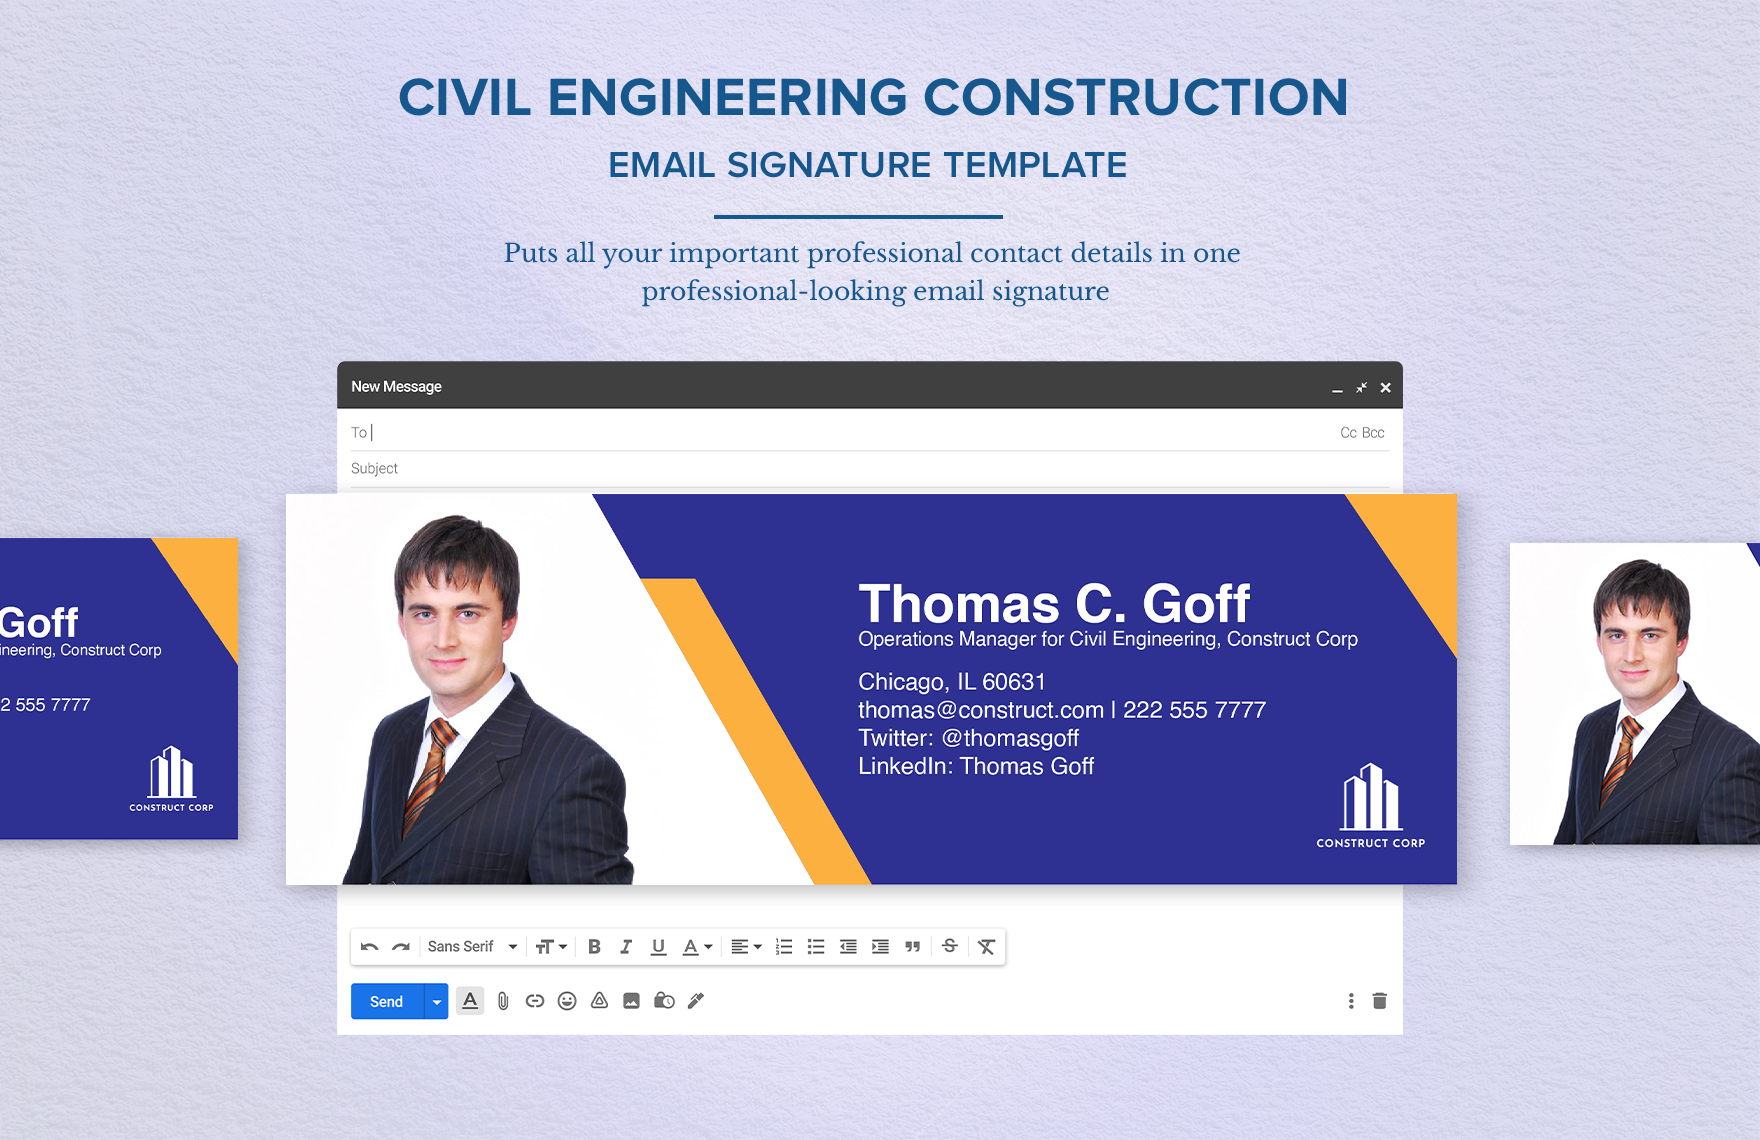 Civil Engineering Construction Email Signature Template